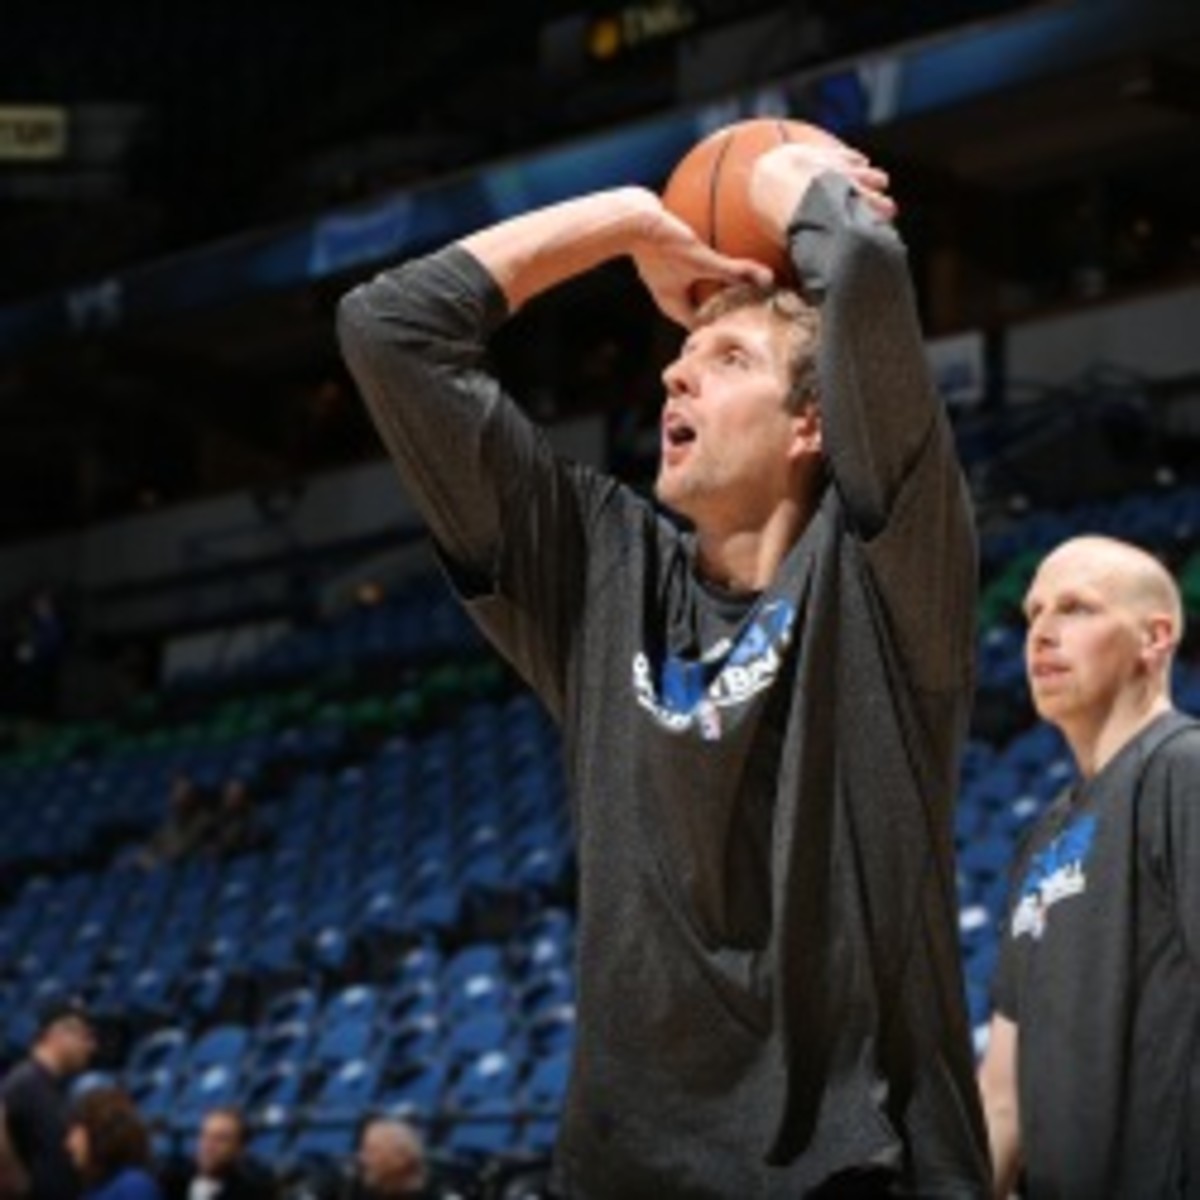 Mavericks forward Dirk Nowitzki had a full contact practice for the first time this season. (David Sherman/NBA/Getty Images)